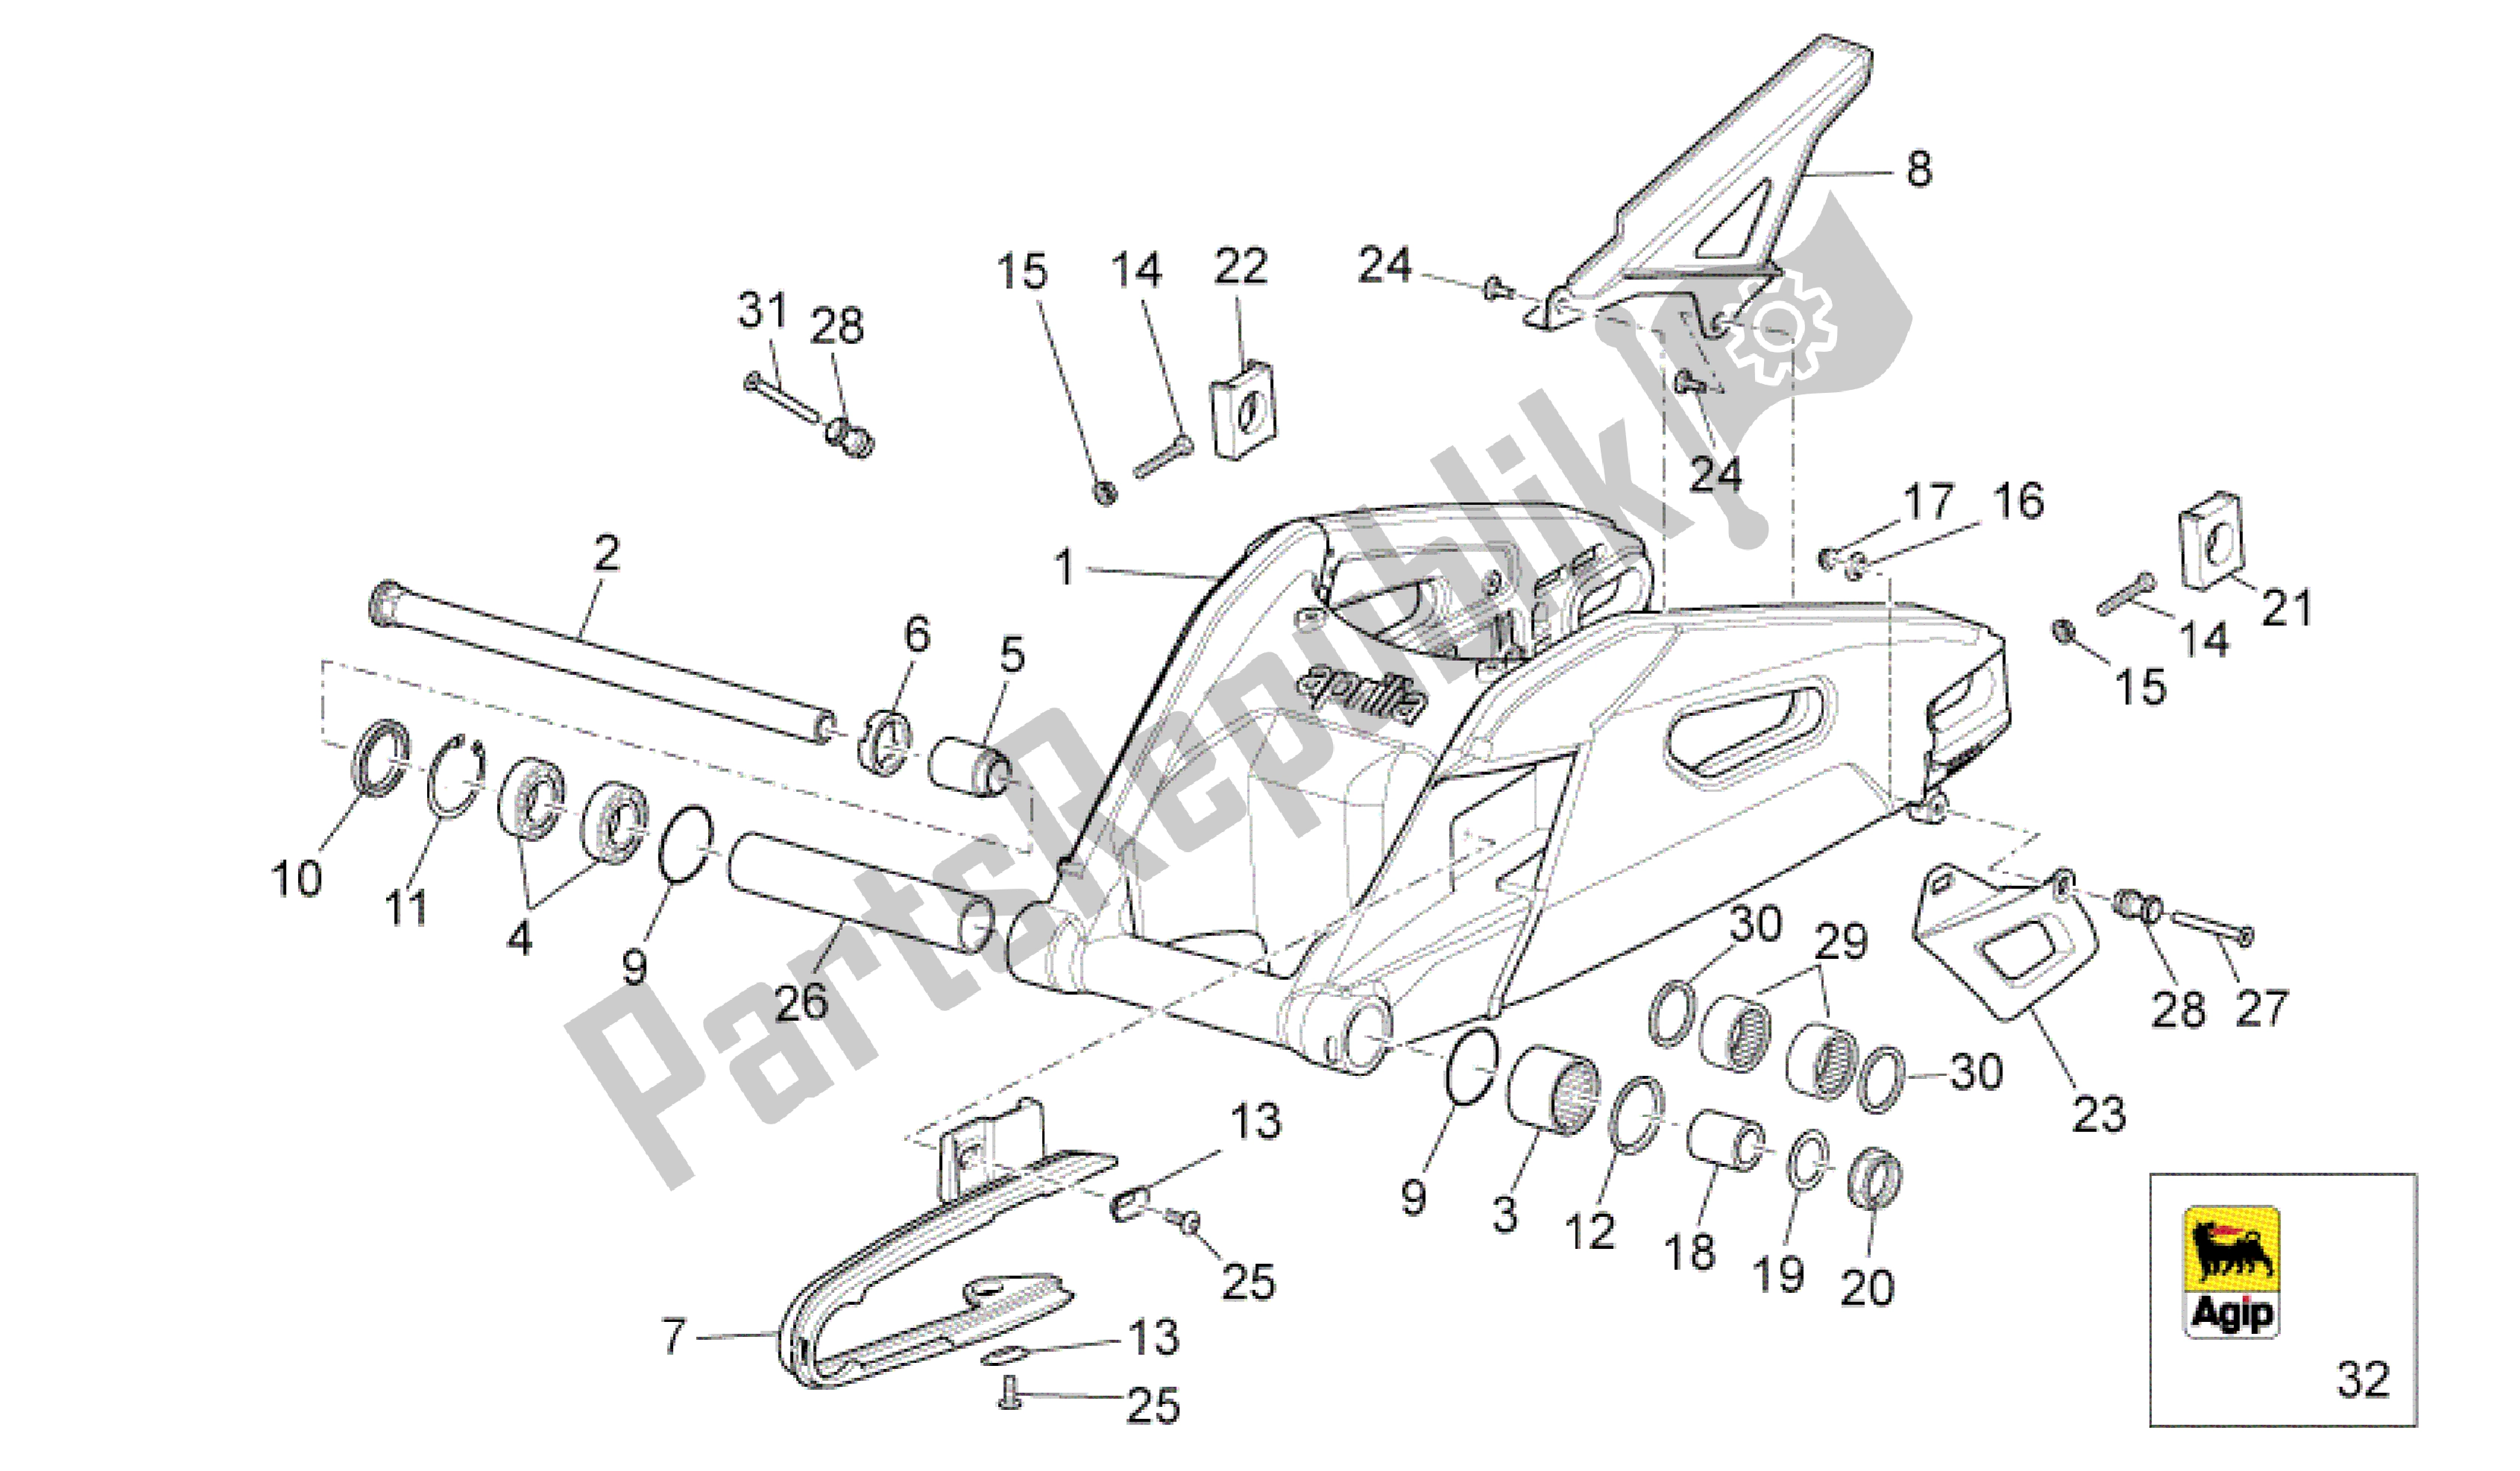 All parts for the Swing Arm of the Aprilia RSV4 Aprc R 3982 1000 2011 - 2012